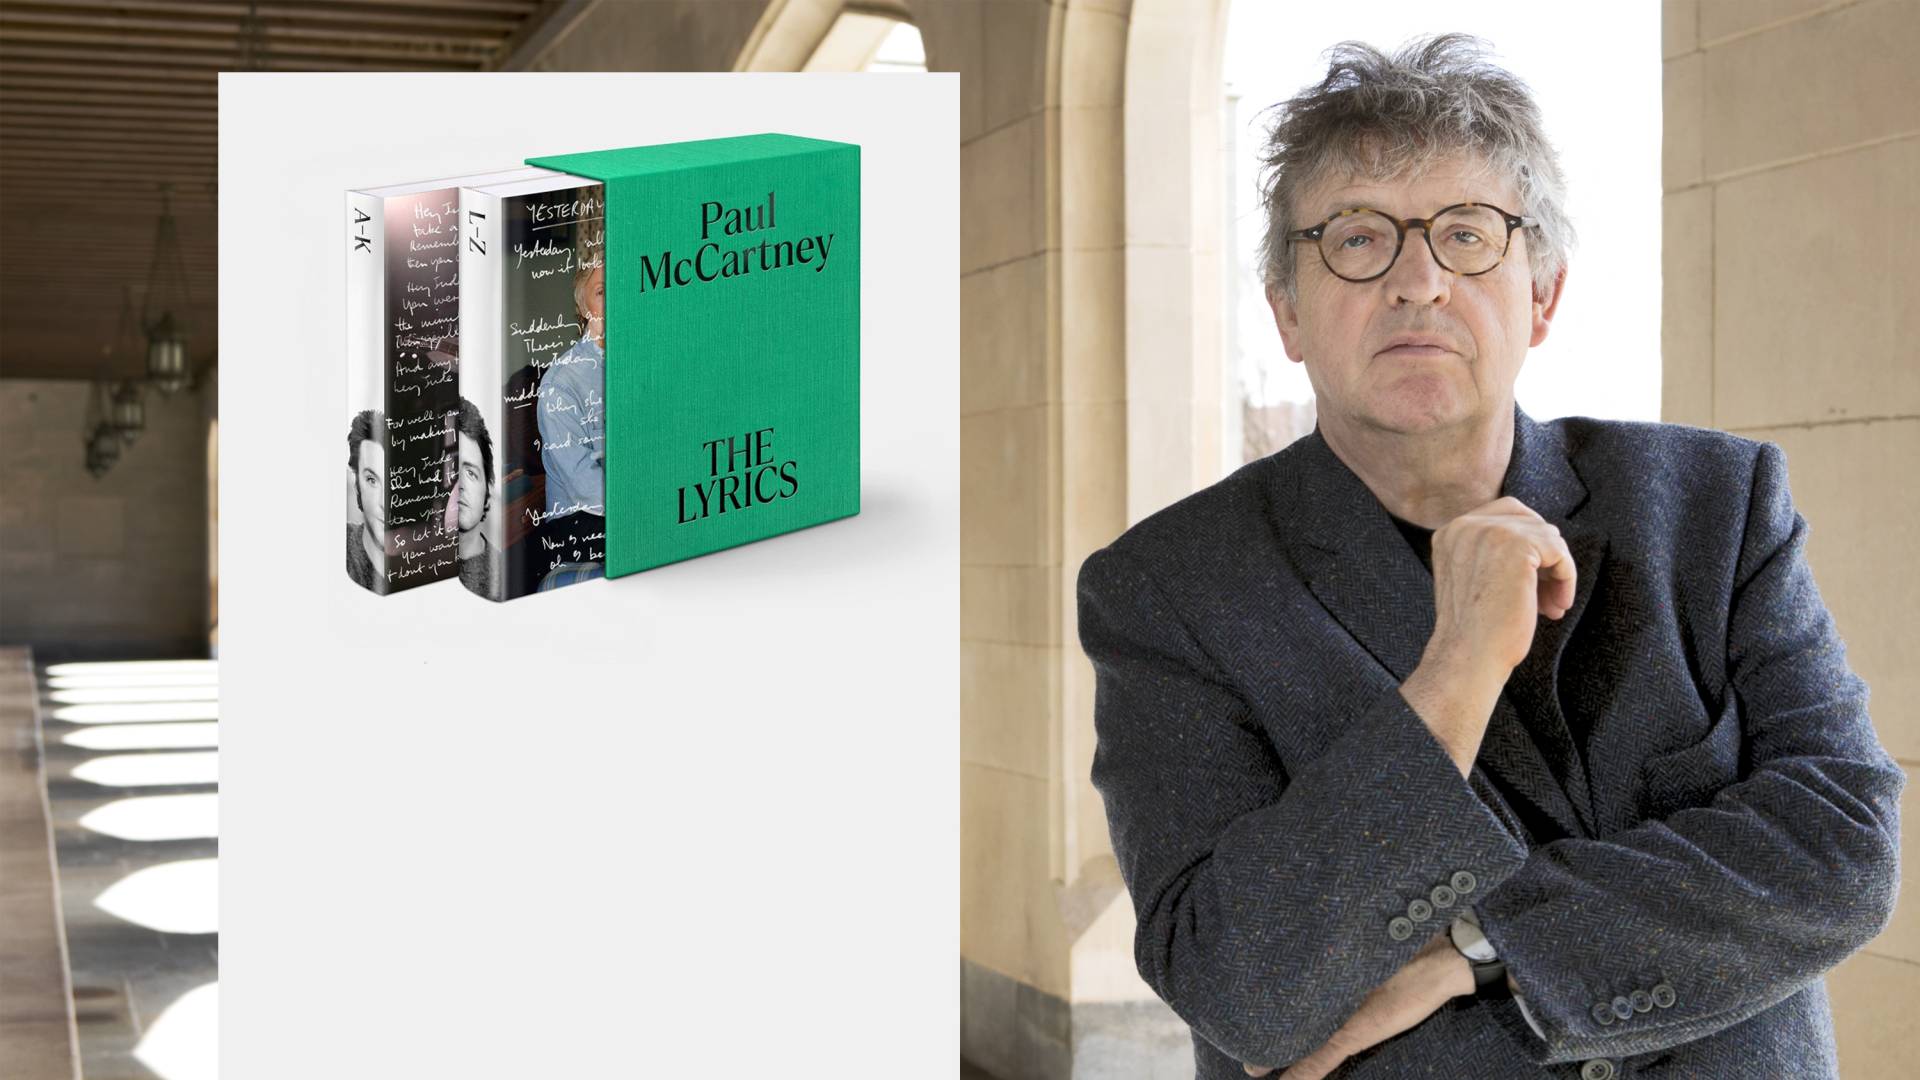 Paul Muldoon and inset of box set of book he co-authored with Paul McCartney